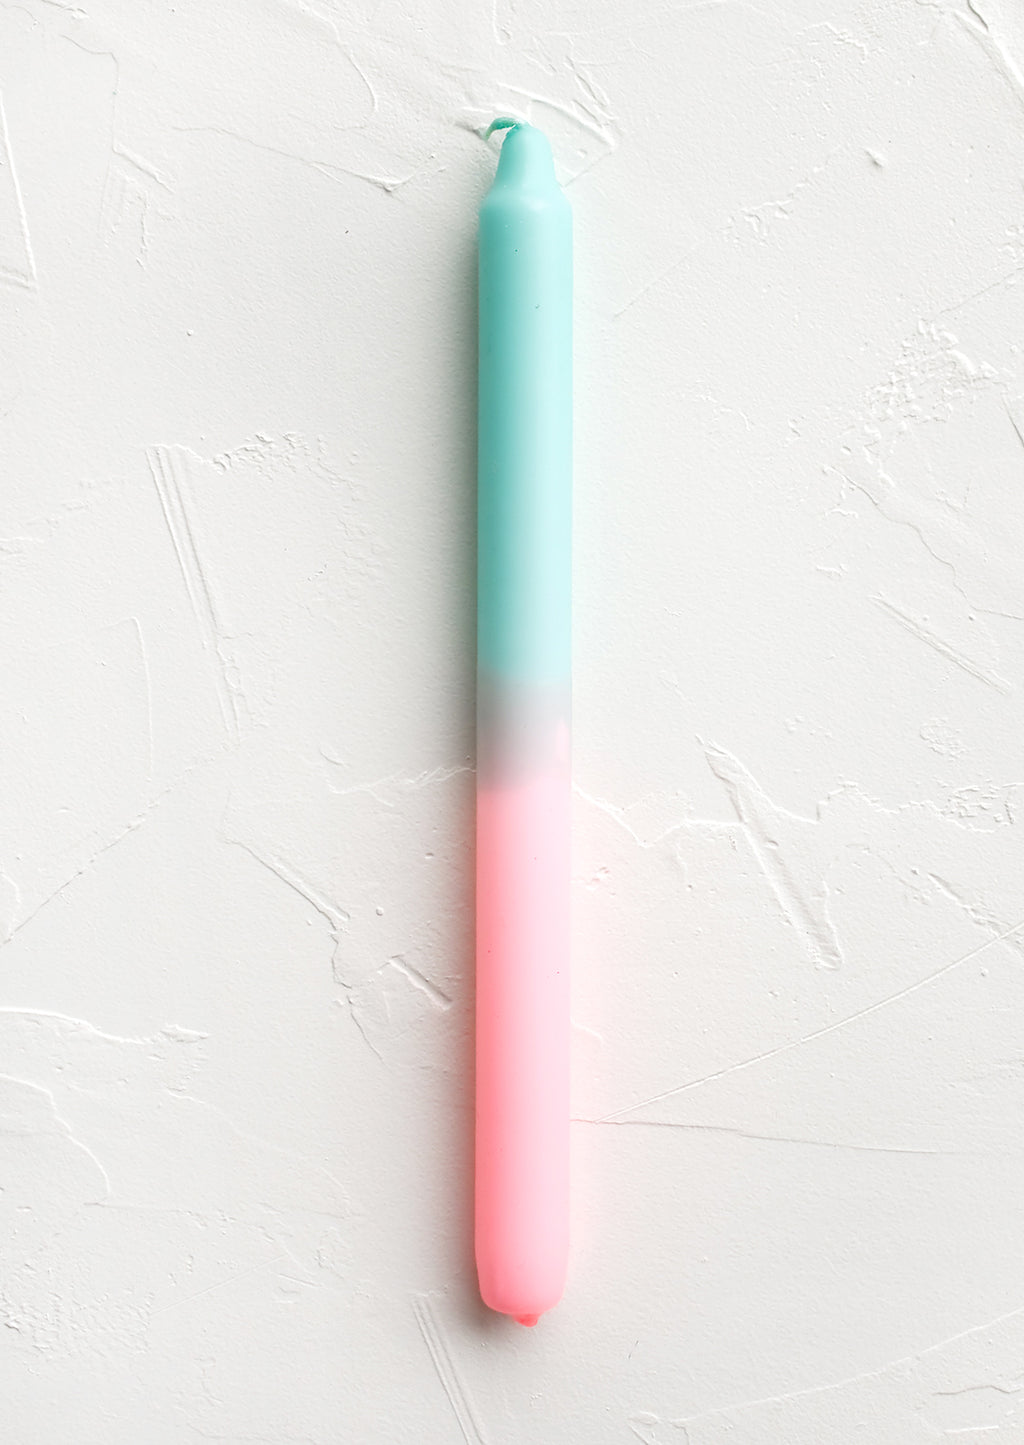 Mint / Pink: A straight taper candle in mint and pink.